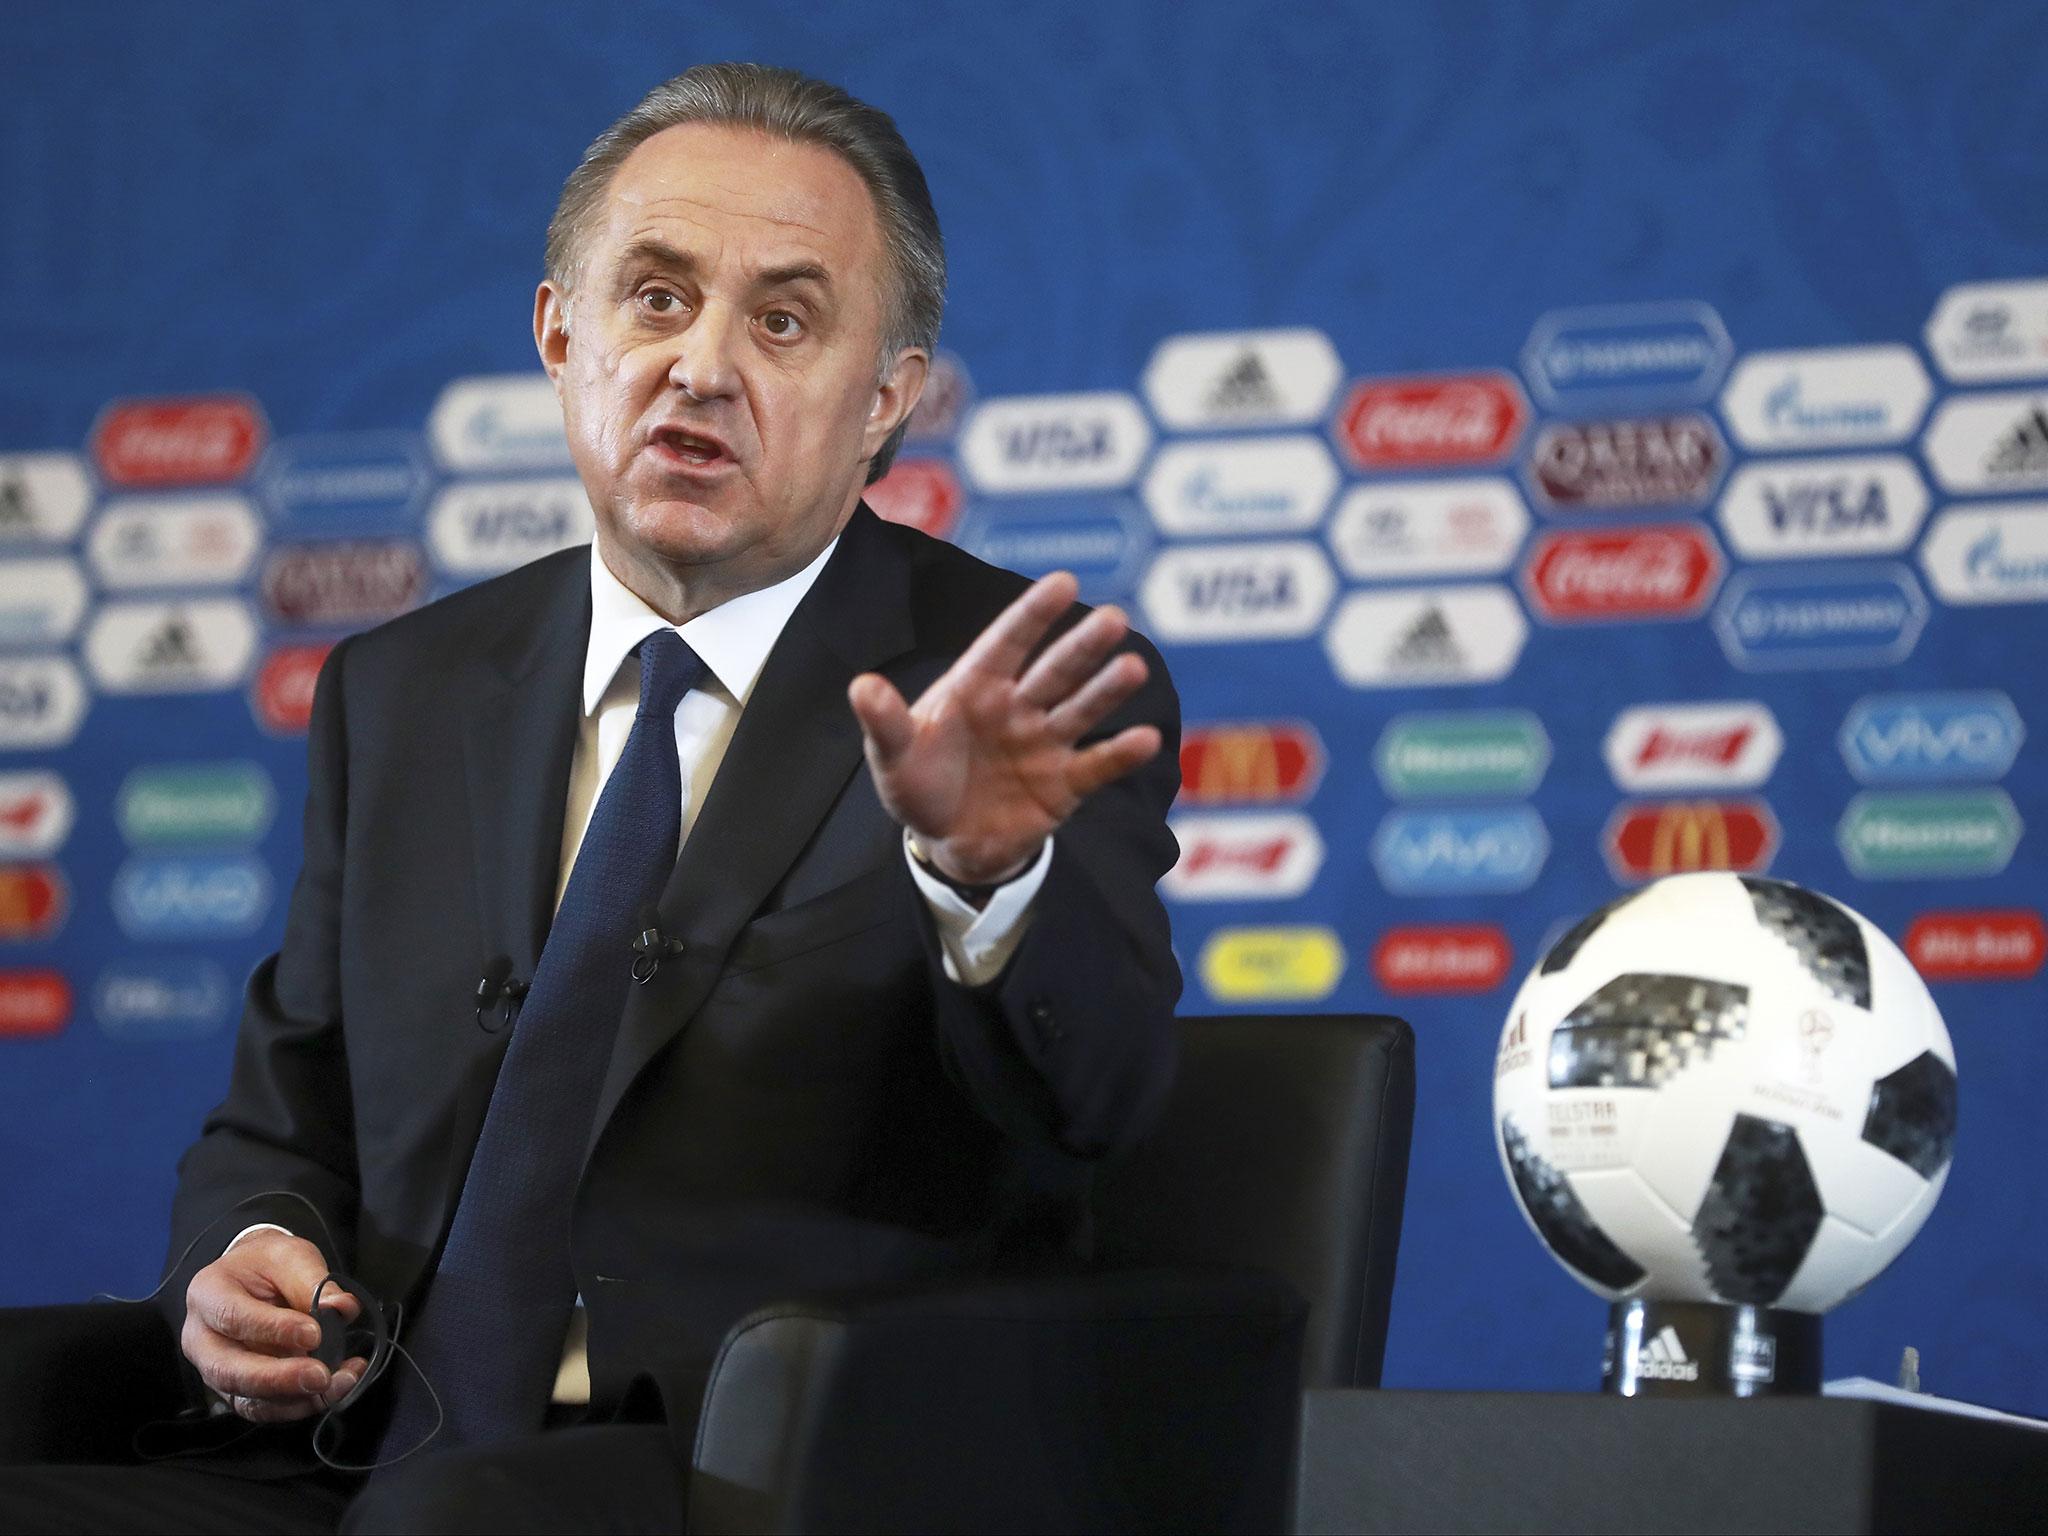 Vitaly Mutko was responsible for Russia’s successful World Cup bid. But more than 90 per cent of Russians say his resignation would help restore confidence in the country’s sport